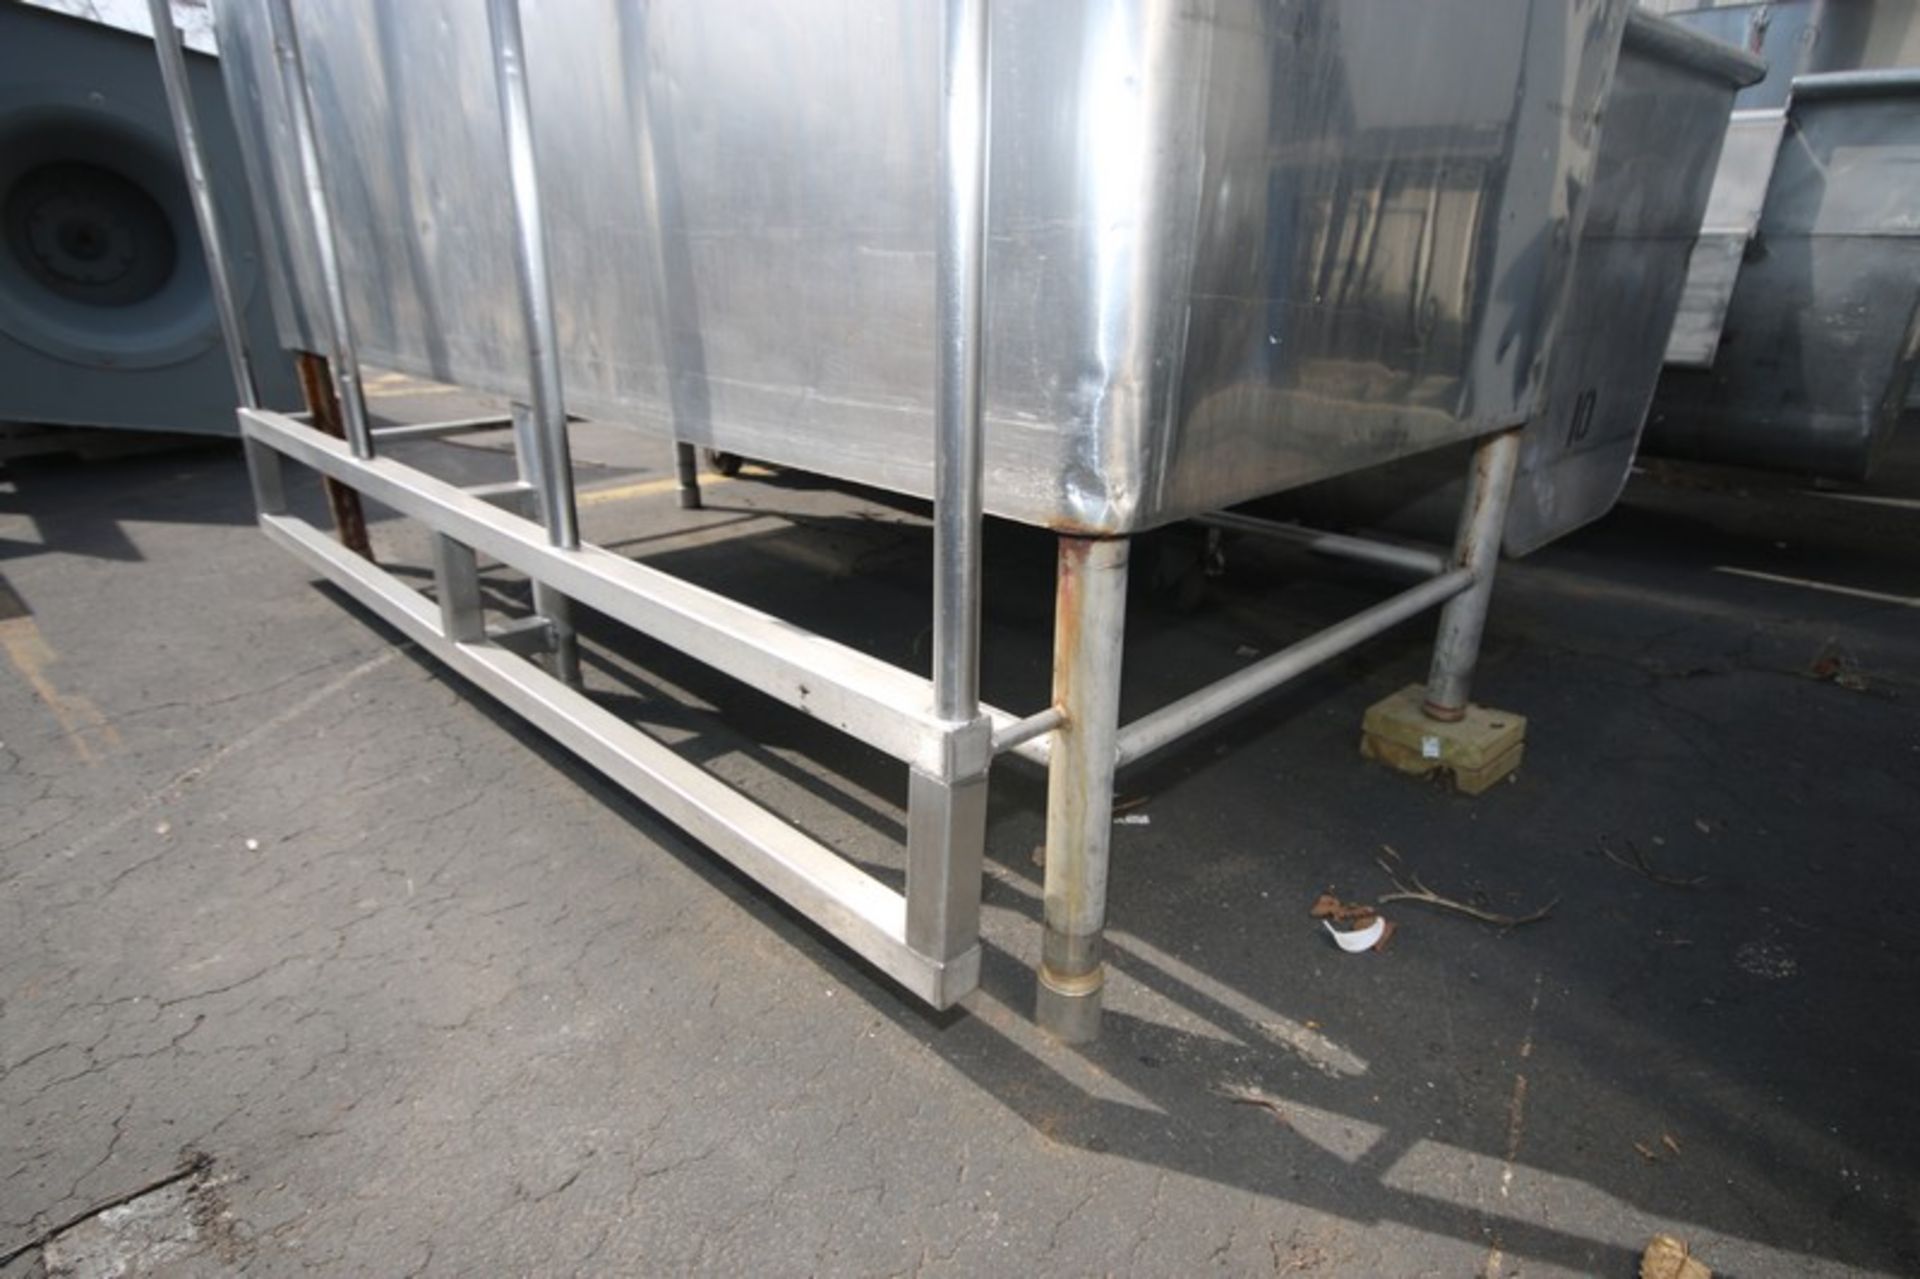 3-Compartment @ Aprox. 170 Gal. Insulated Mix Tank, Internal Compartment Dims.: Aprox. 27" L x 35" W - Image 8 of 12